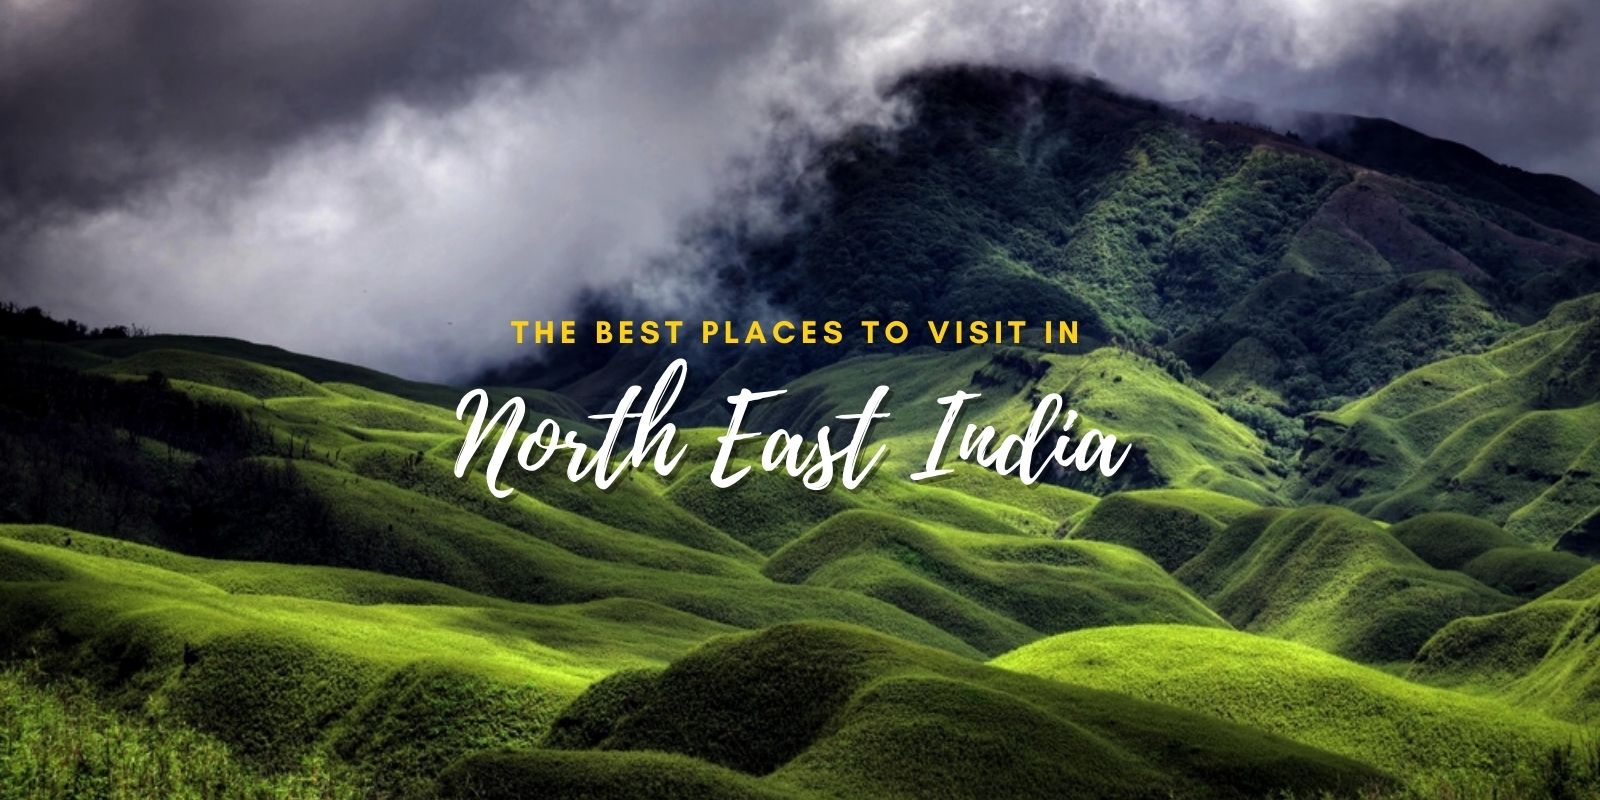 Detailed List of The Best Places to Visit in North East India